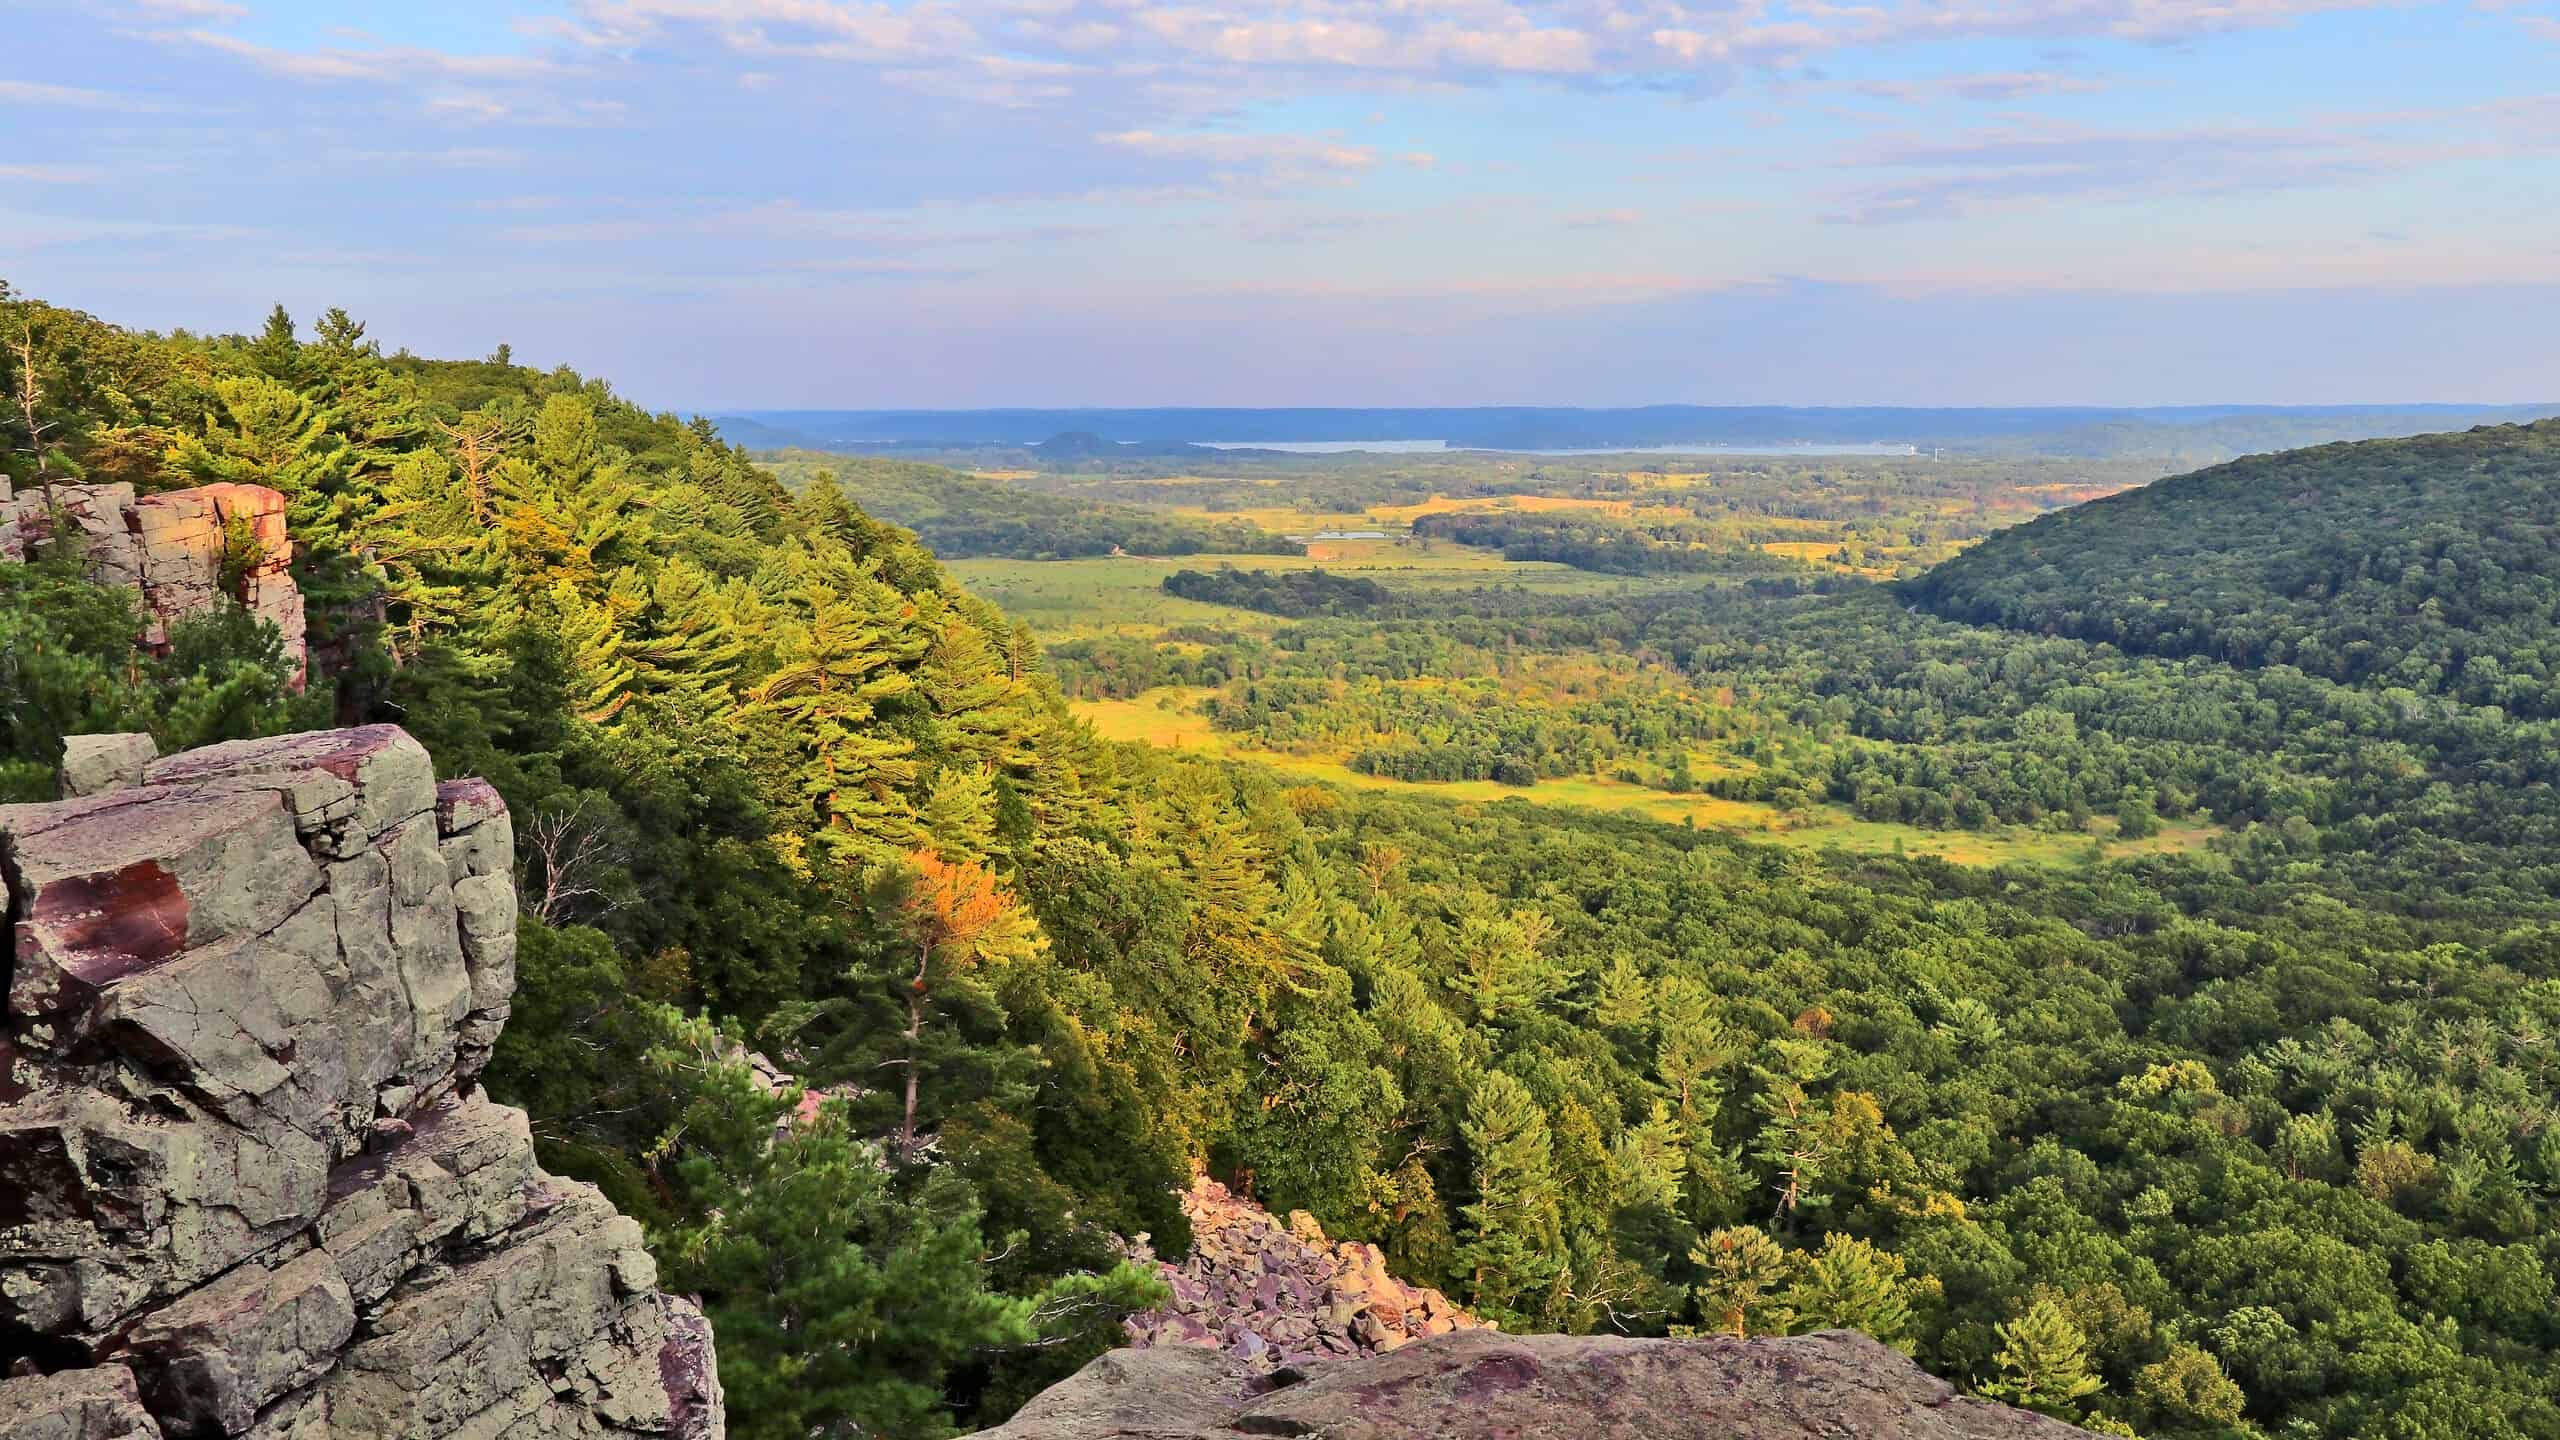 Beautiful Wisconsin summer nature background. Areal view from rocky ice age hiking trail during sunset hours. Devil's Lake State Park, Baraboo area, Wisconsin, Midwest USA.